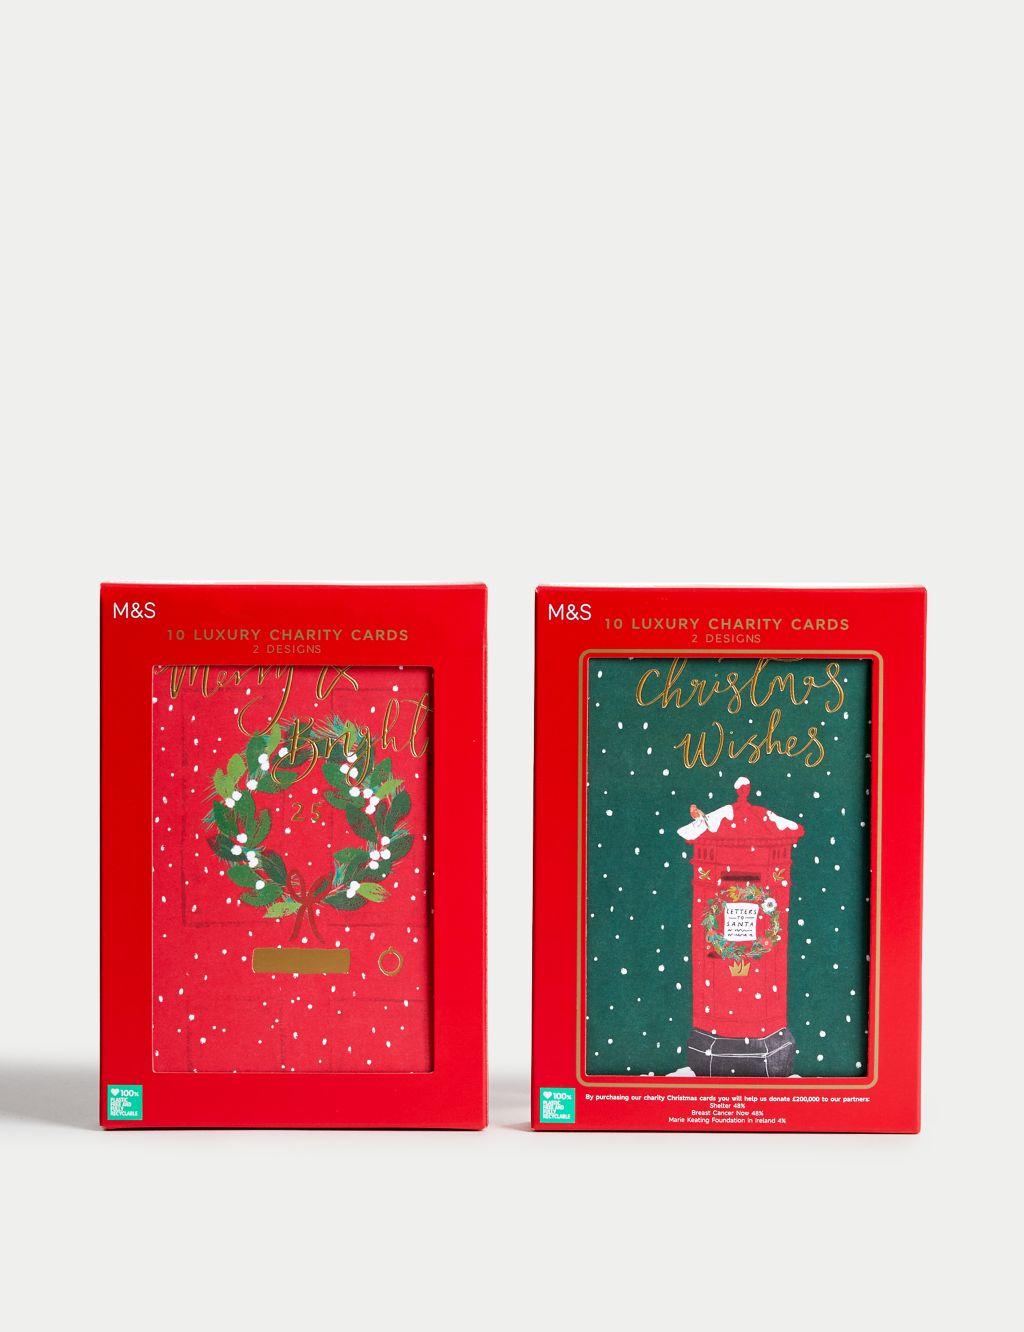 Luxury Charity Christmas Cards - Pack of 20, 2 Festive Designs